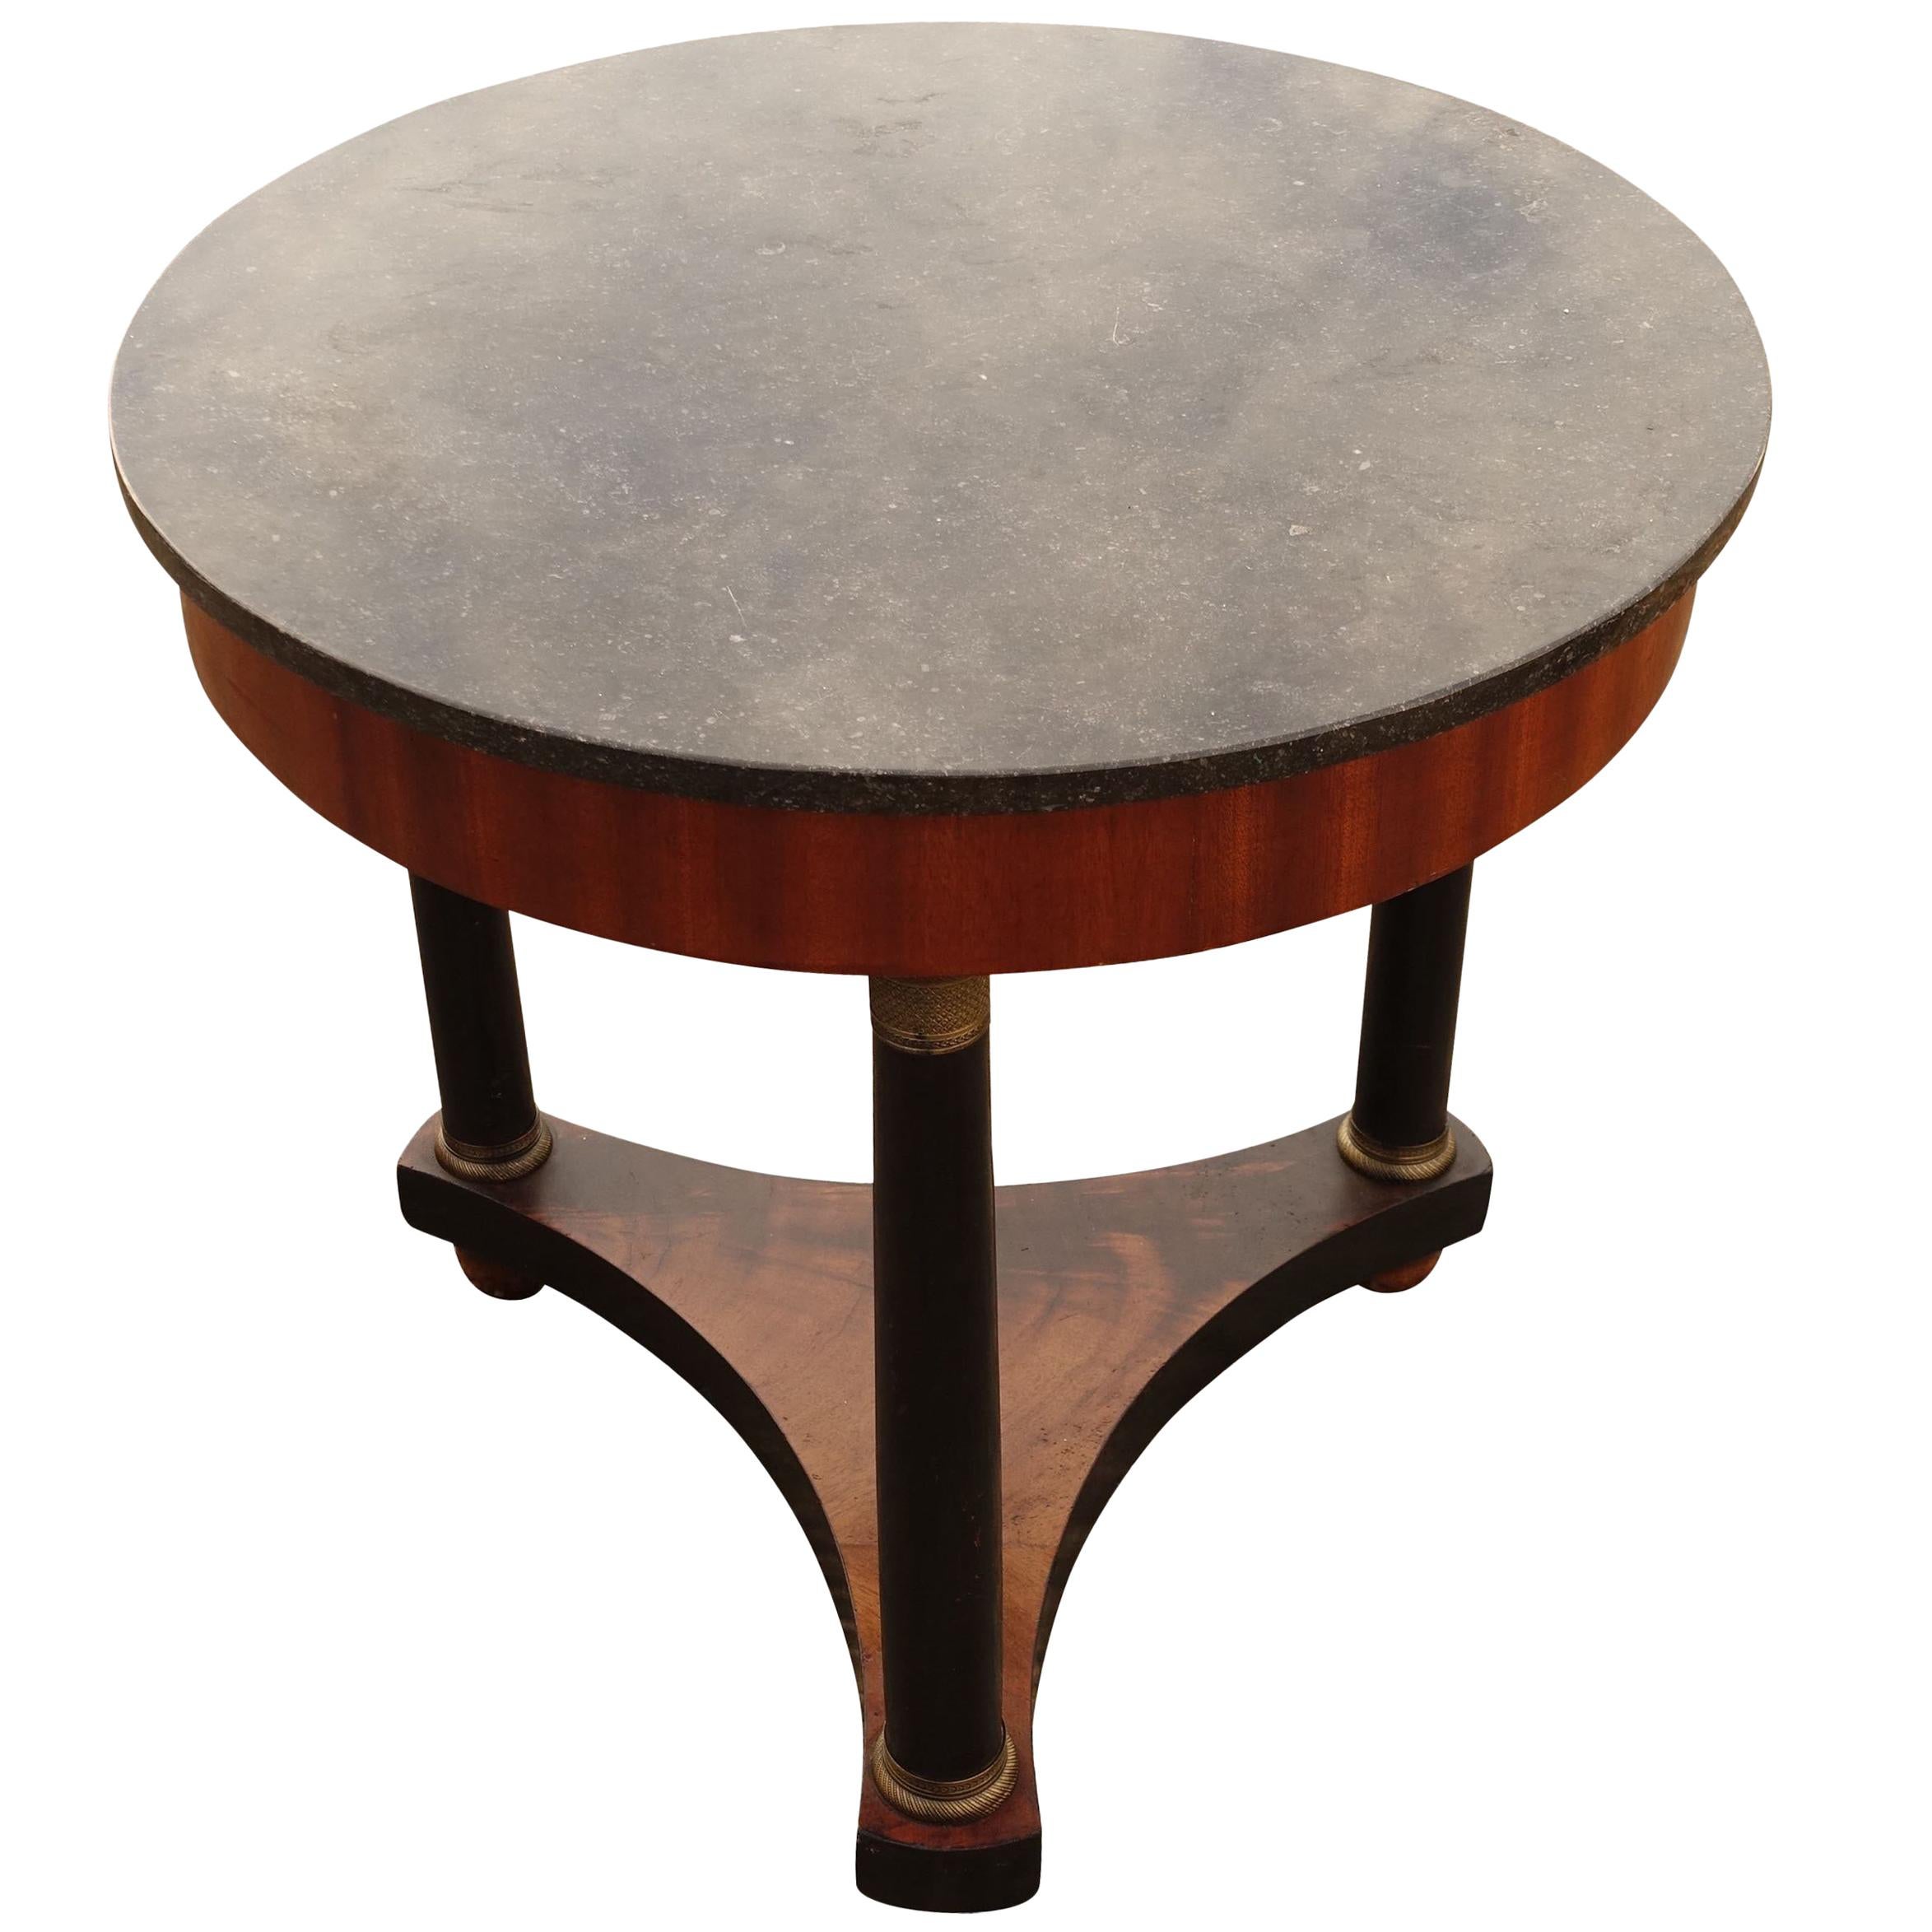 19th Century French Empire Round Side Table